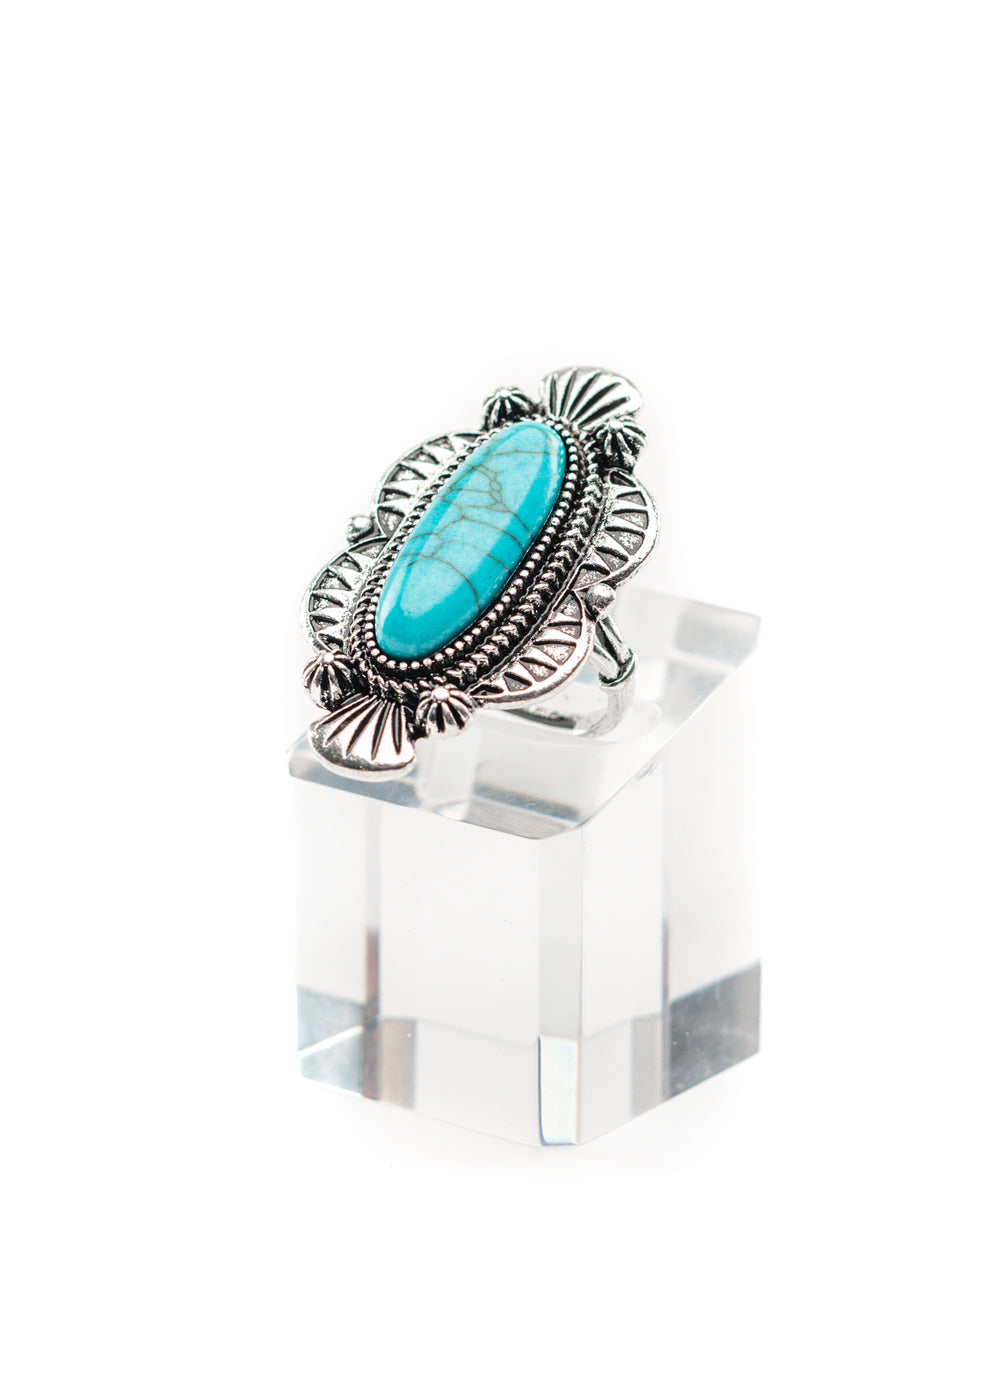 "Adjustable Enlongated Navajo Inspired..Turquoise Ring"